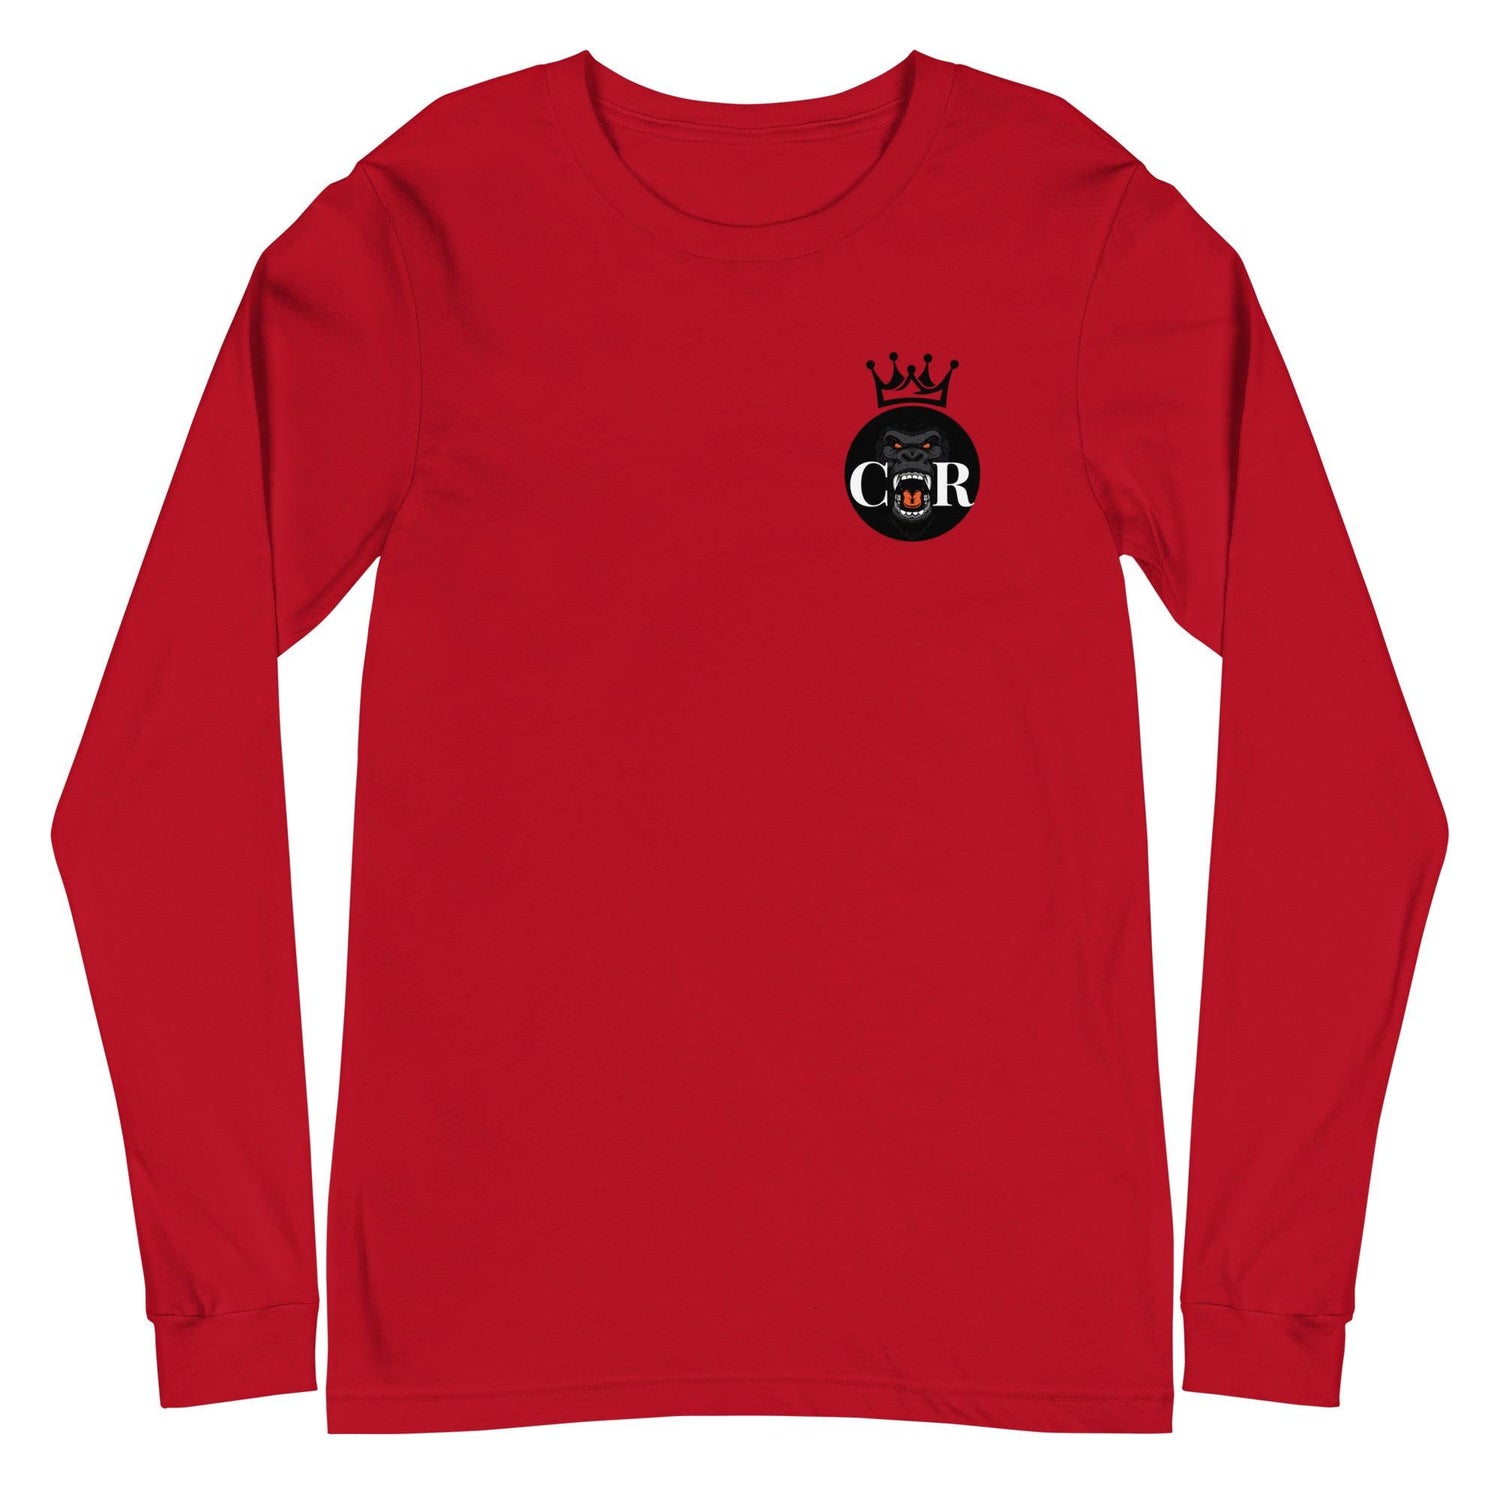 Chris Royster "Crowned" Long Sleeve Tee - Fan Arch